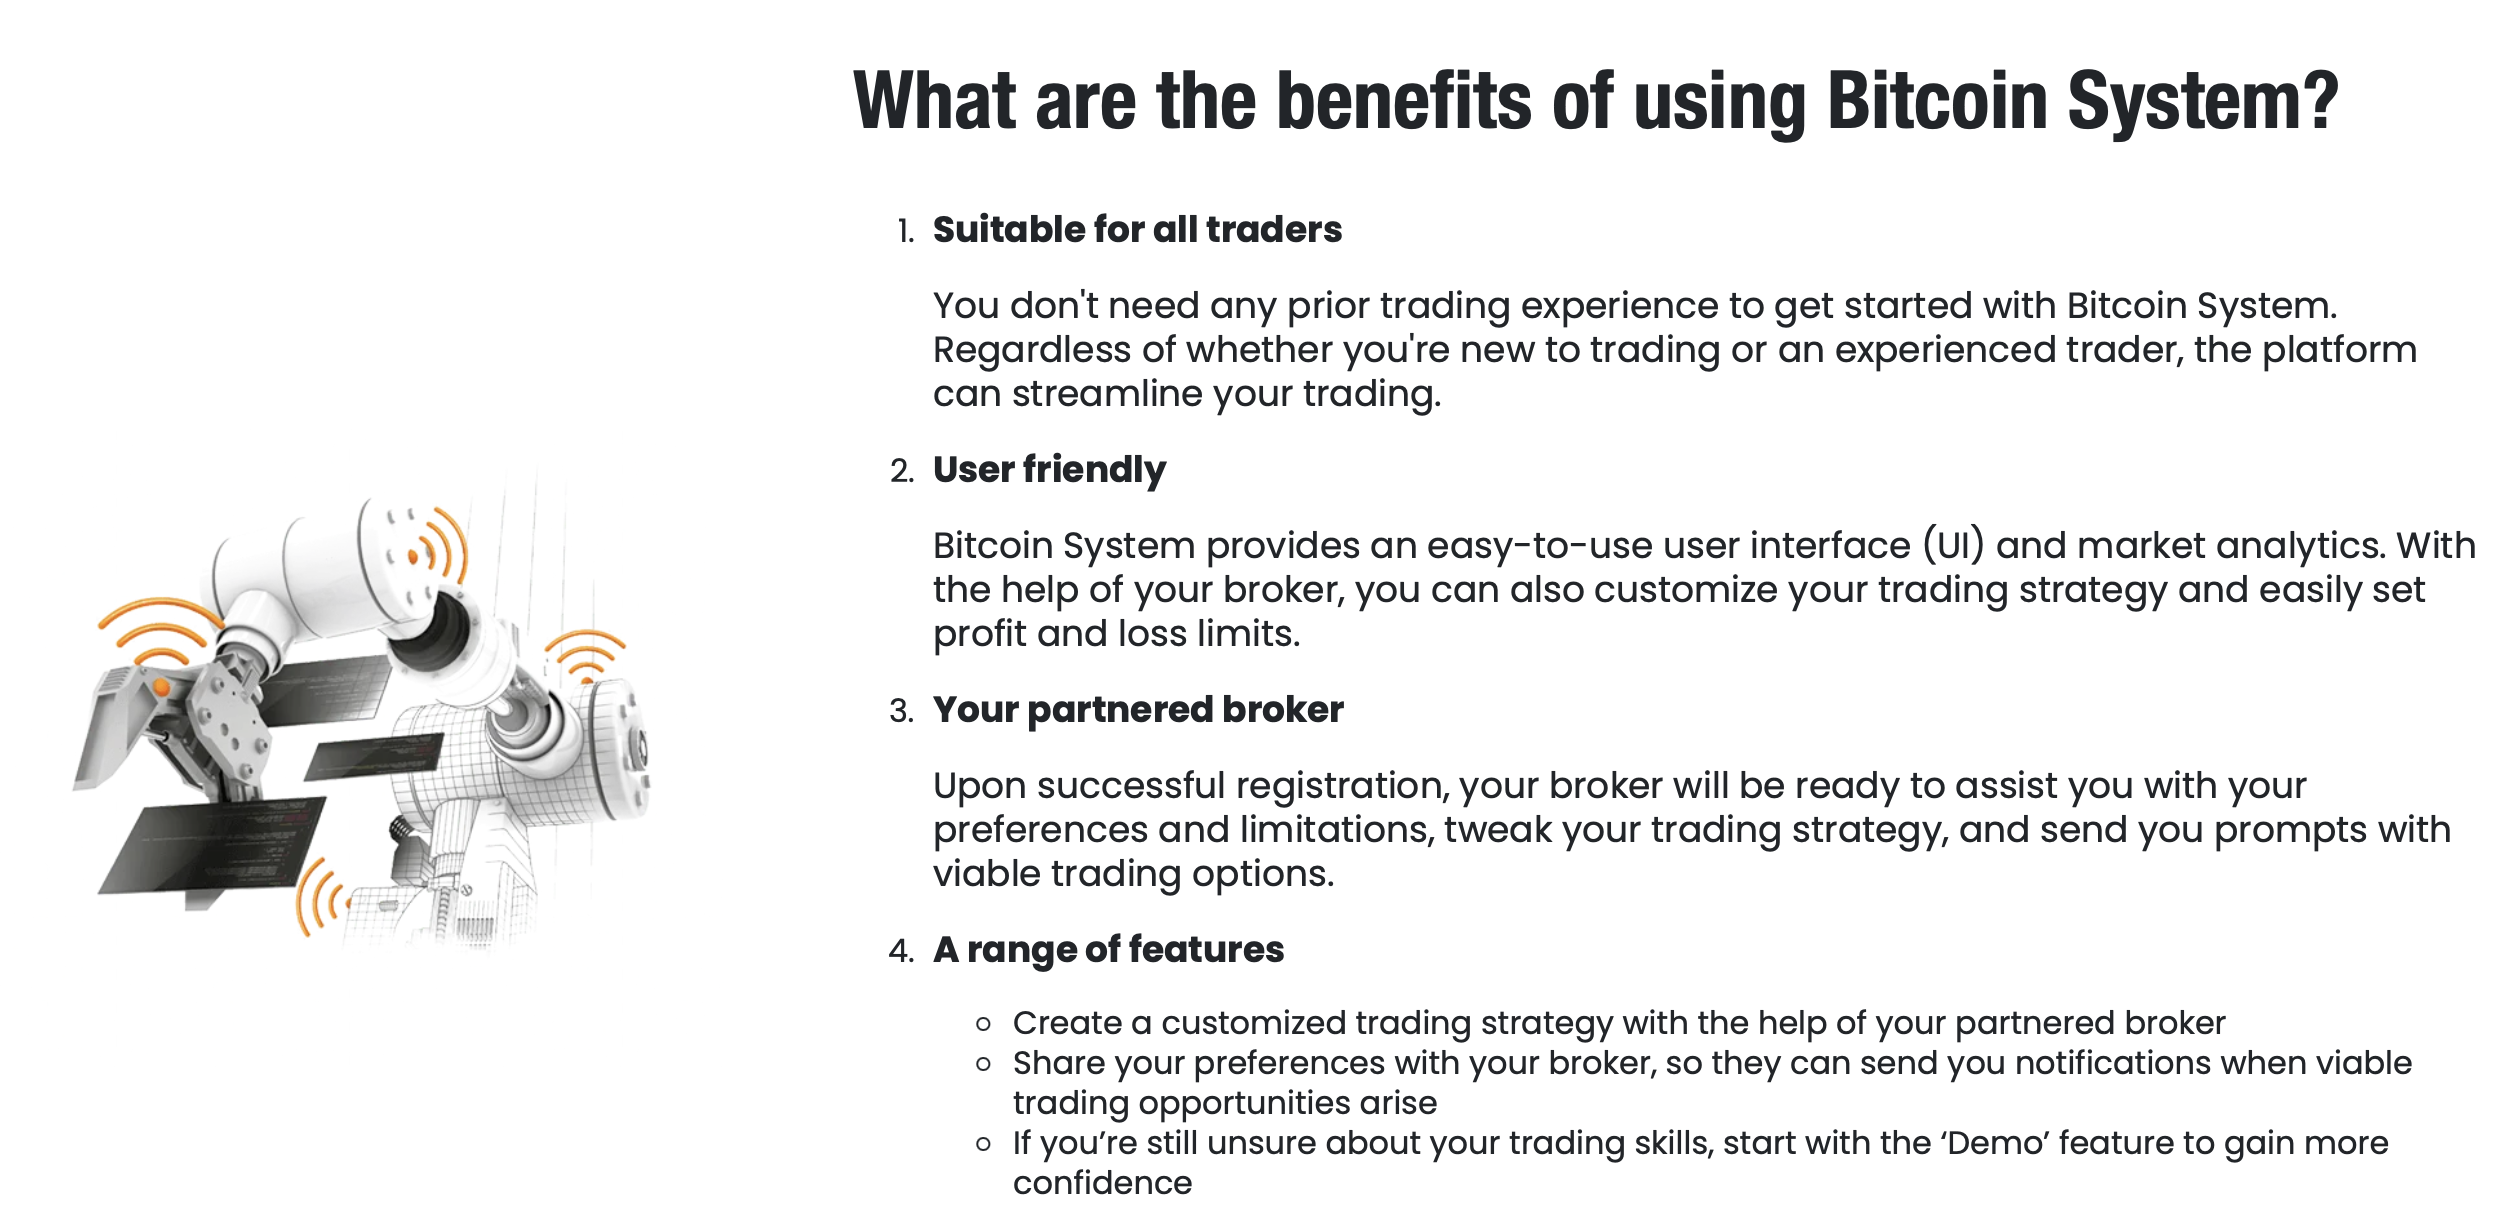 Benefits of trading with the Bitcoin system